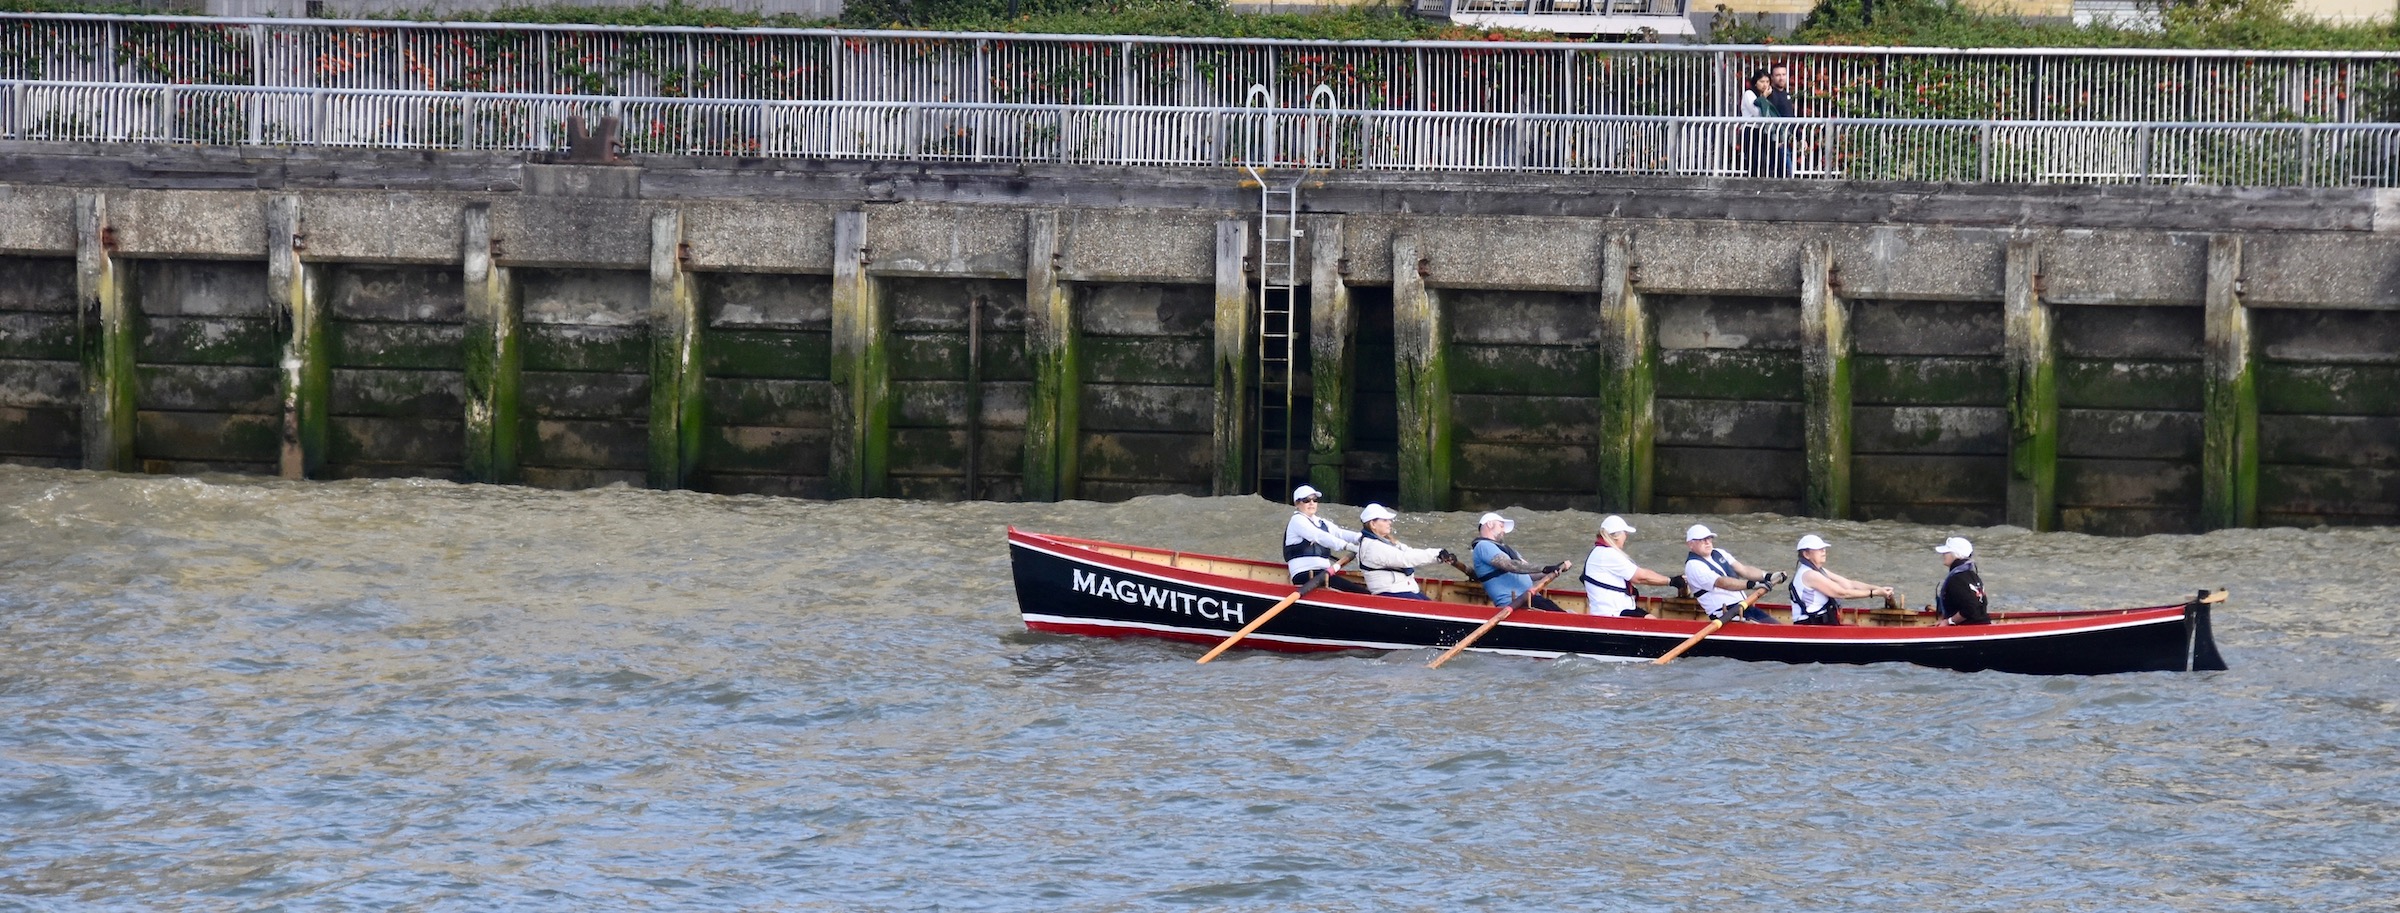 Rowing Team, London by Boat